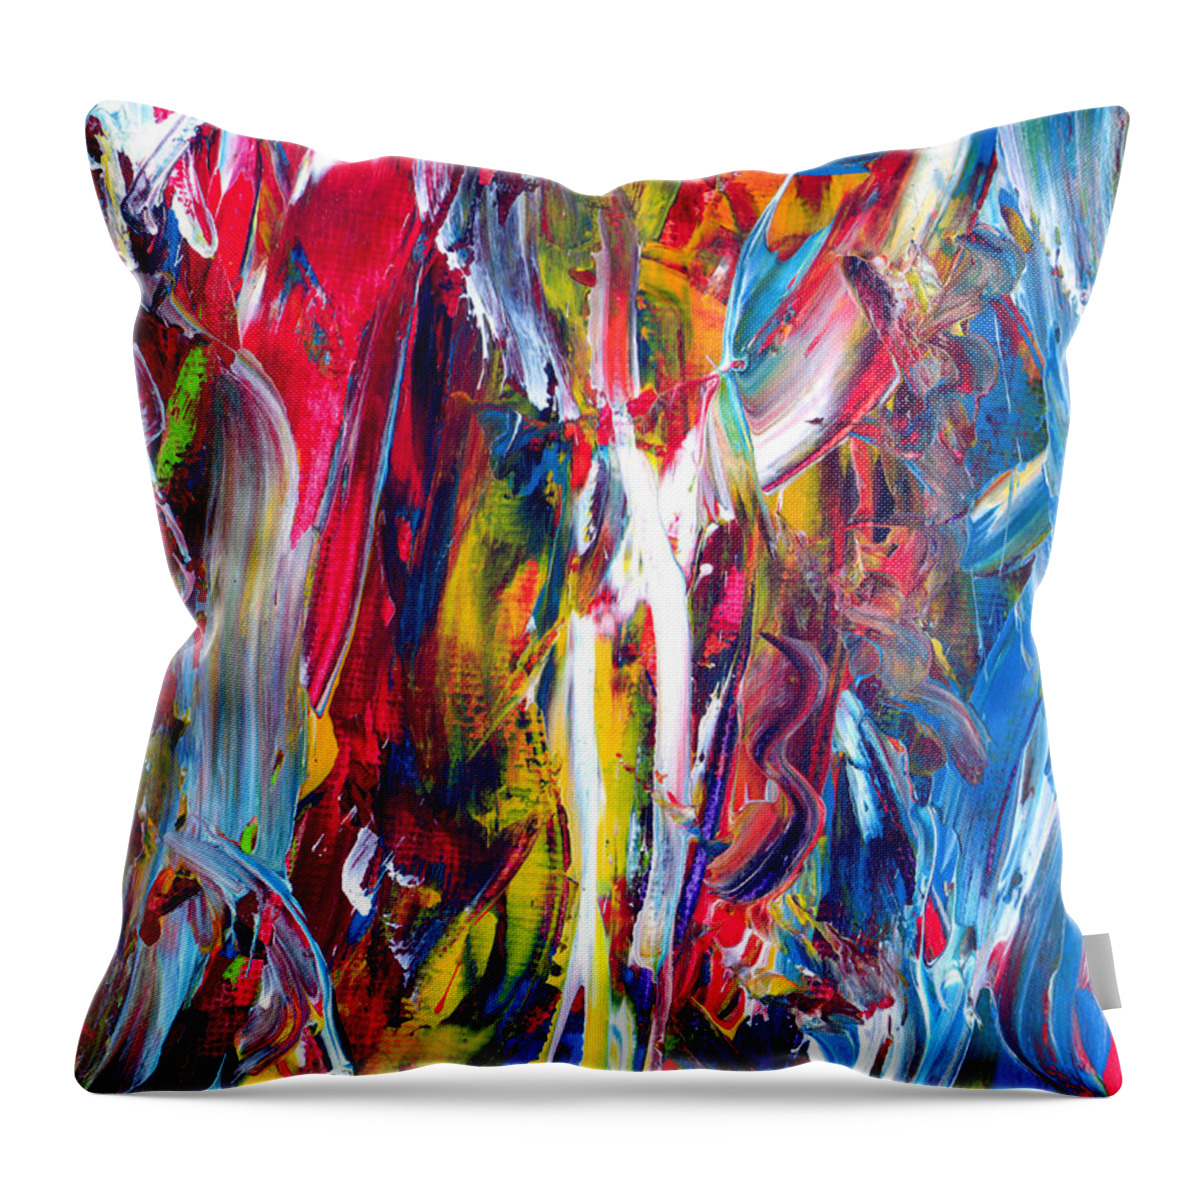 Colorful Throw Pillow featuring the painting Acrylic Color Study Nine Ten Eleven 2 by Carl Deaville